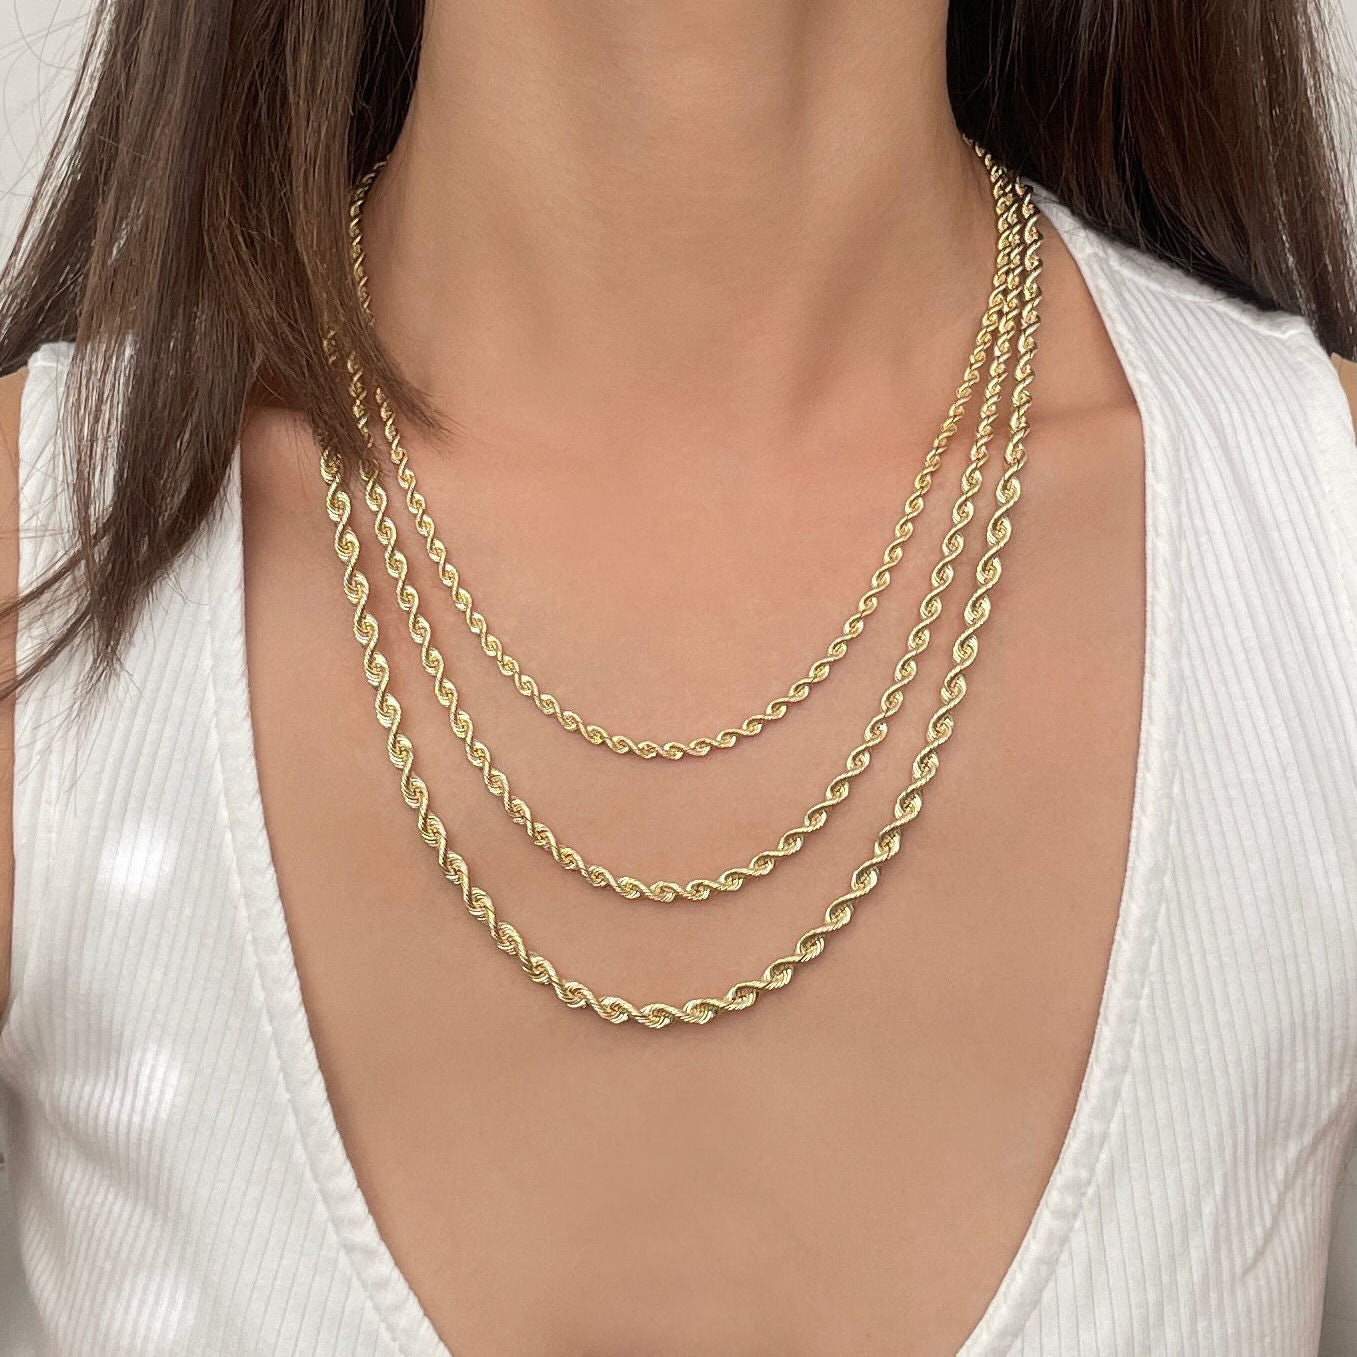 14K SOLID YELLOW GOLD ROPE NECKLACE CHAIN